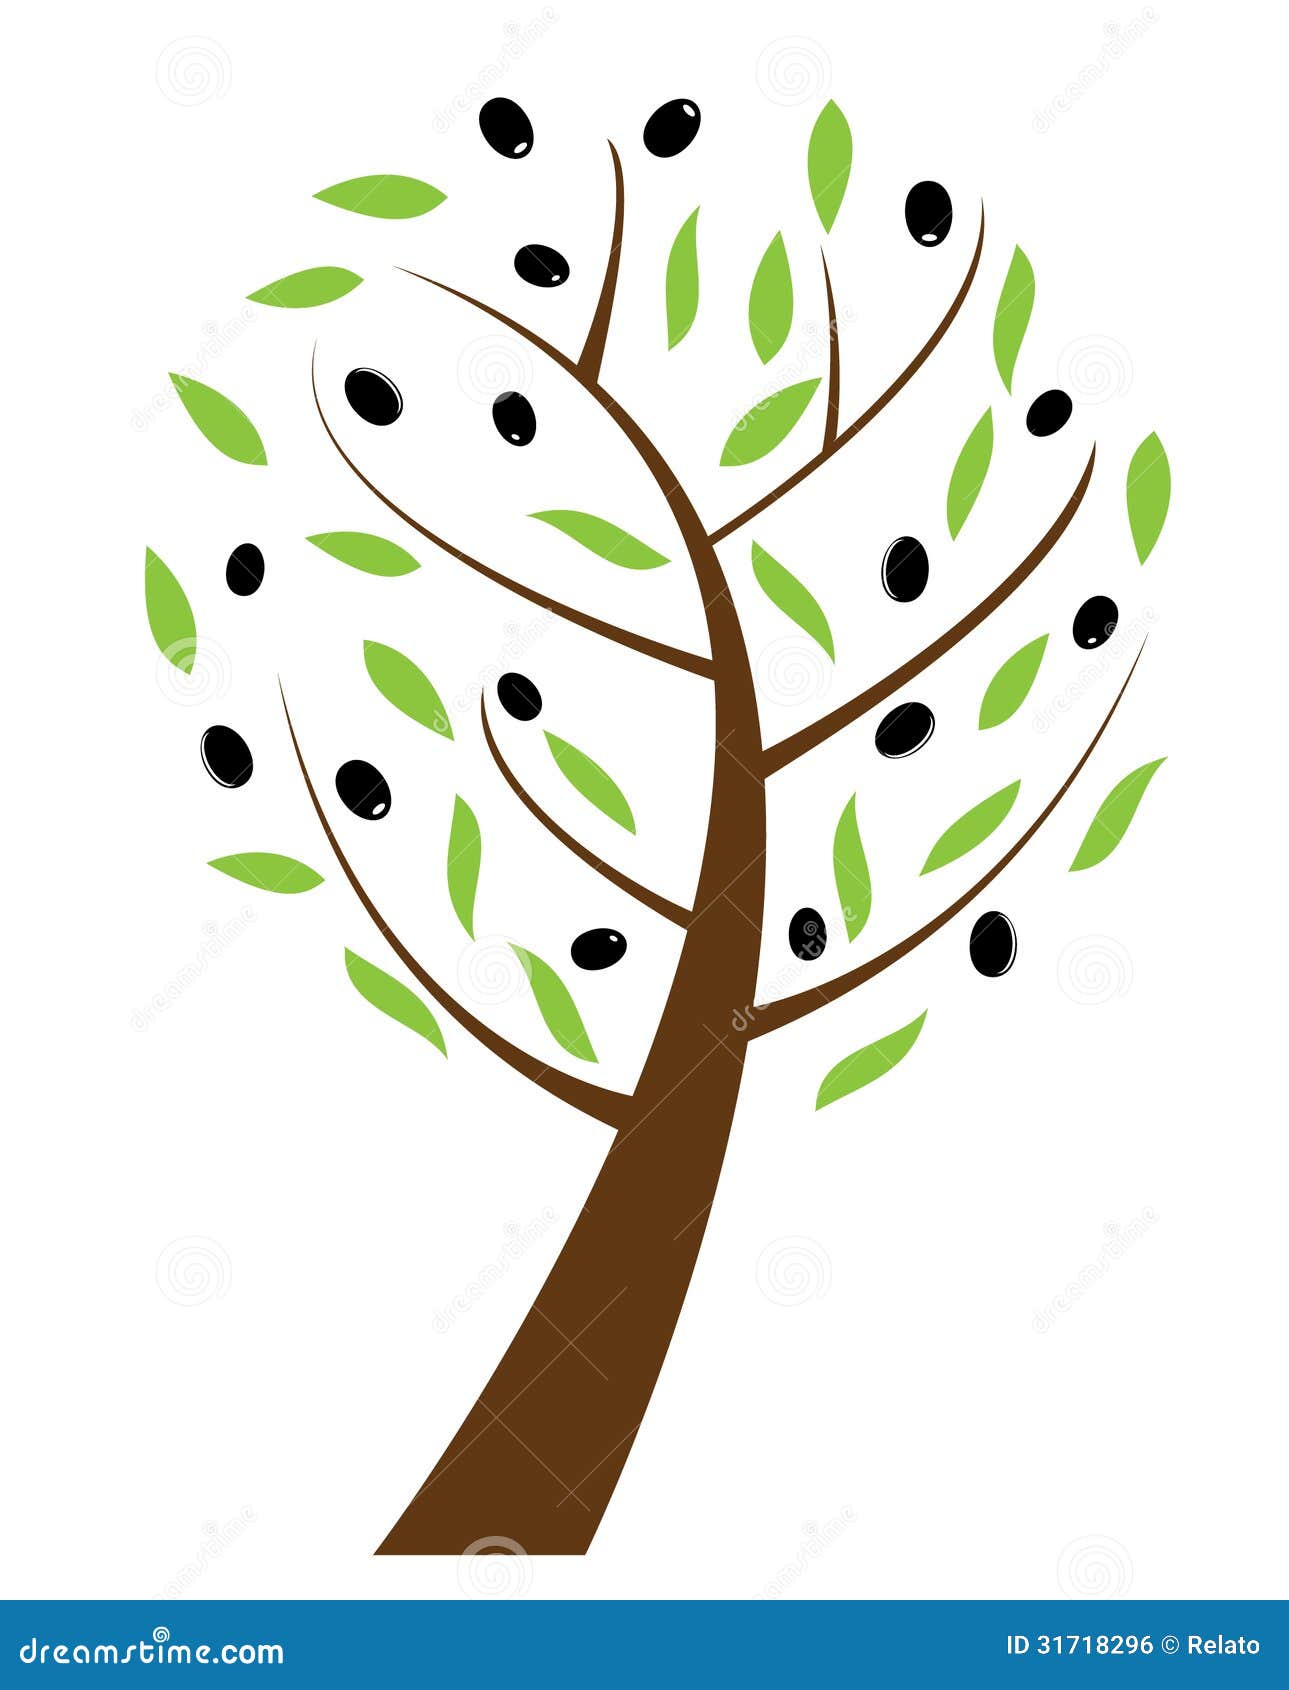 olive tree clip art images - photo #16